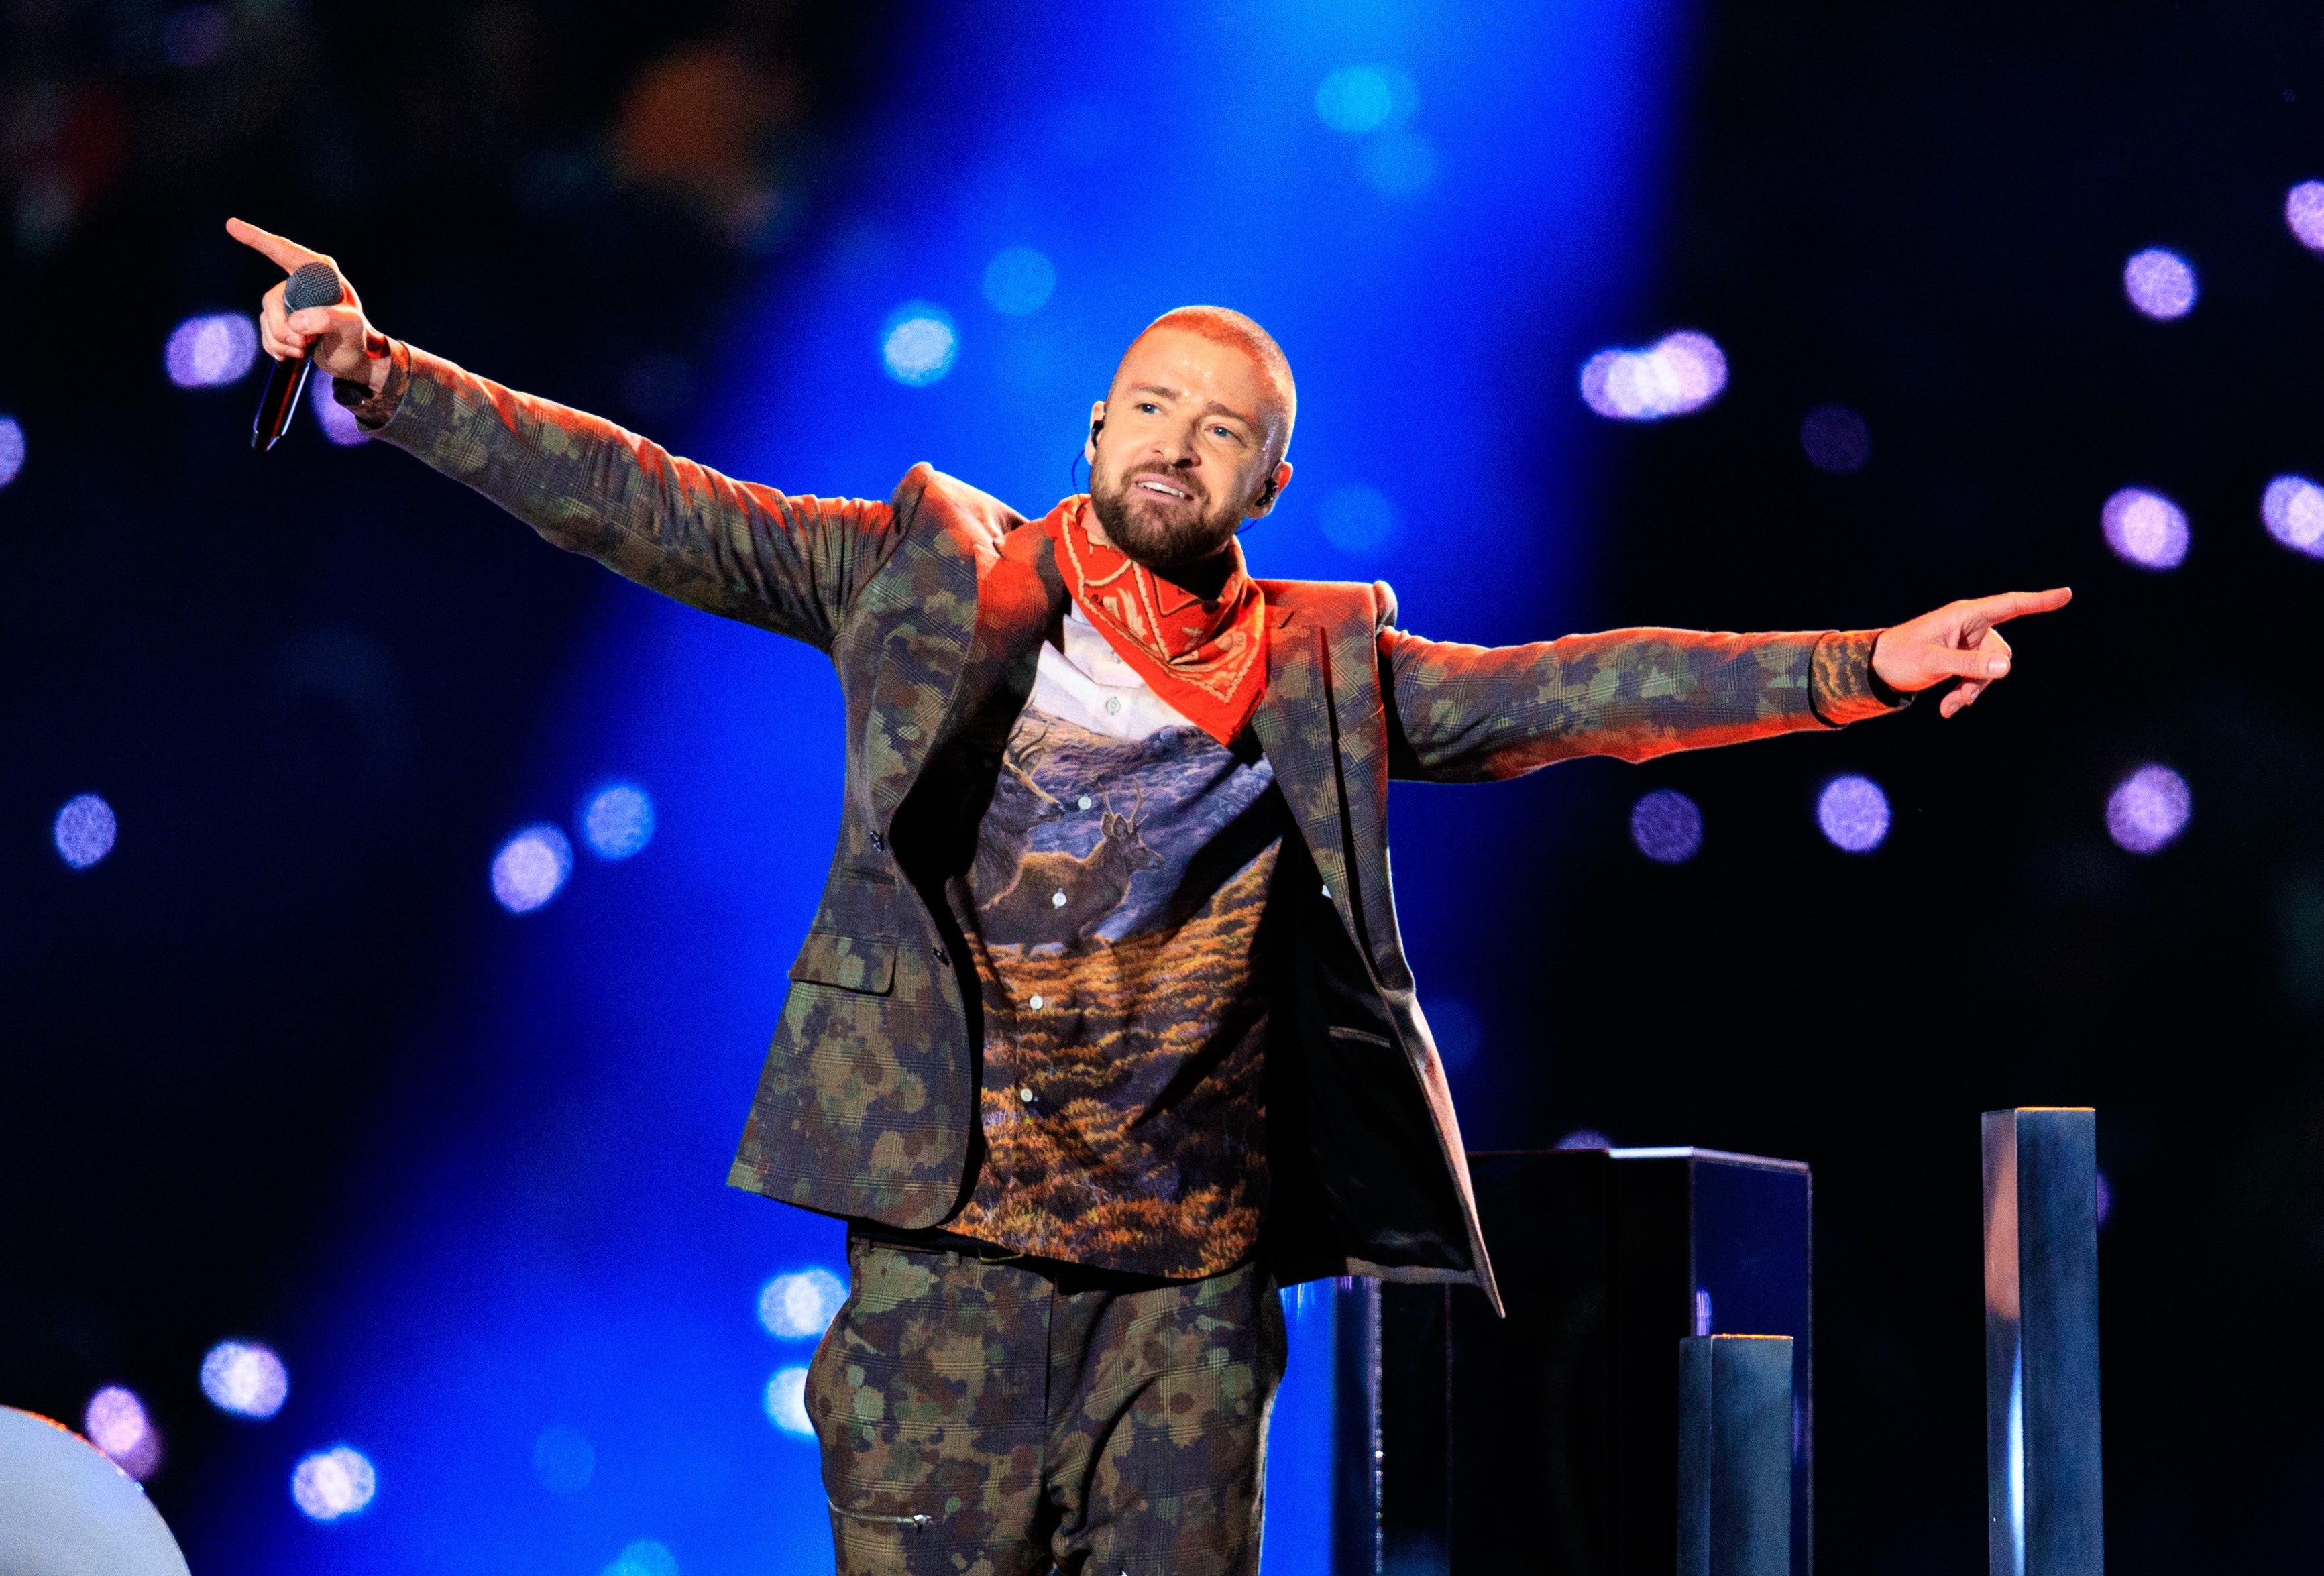 OP-ED: It's Time To Talk About Justin Timberlake, Mediocrity And Disrespect
